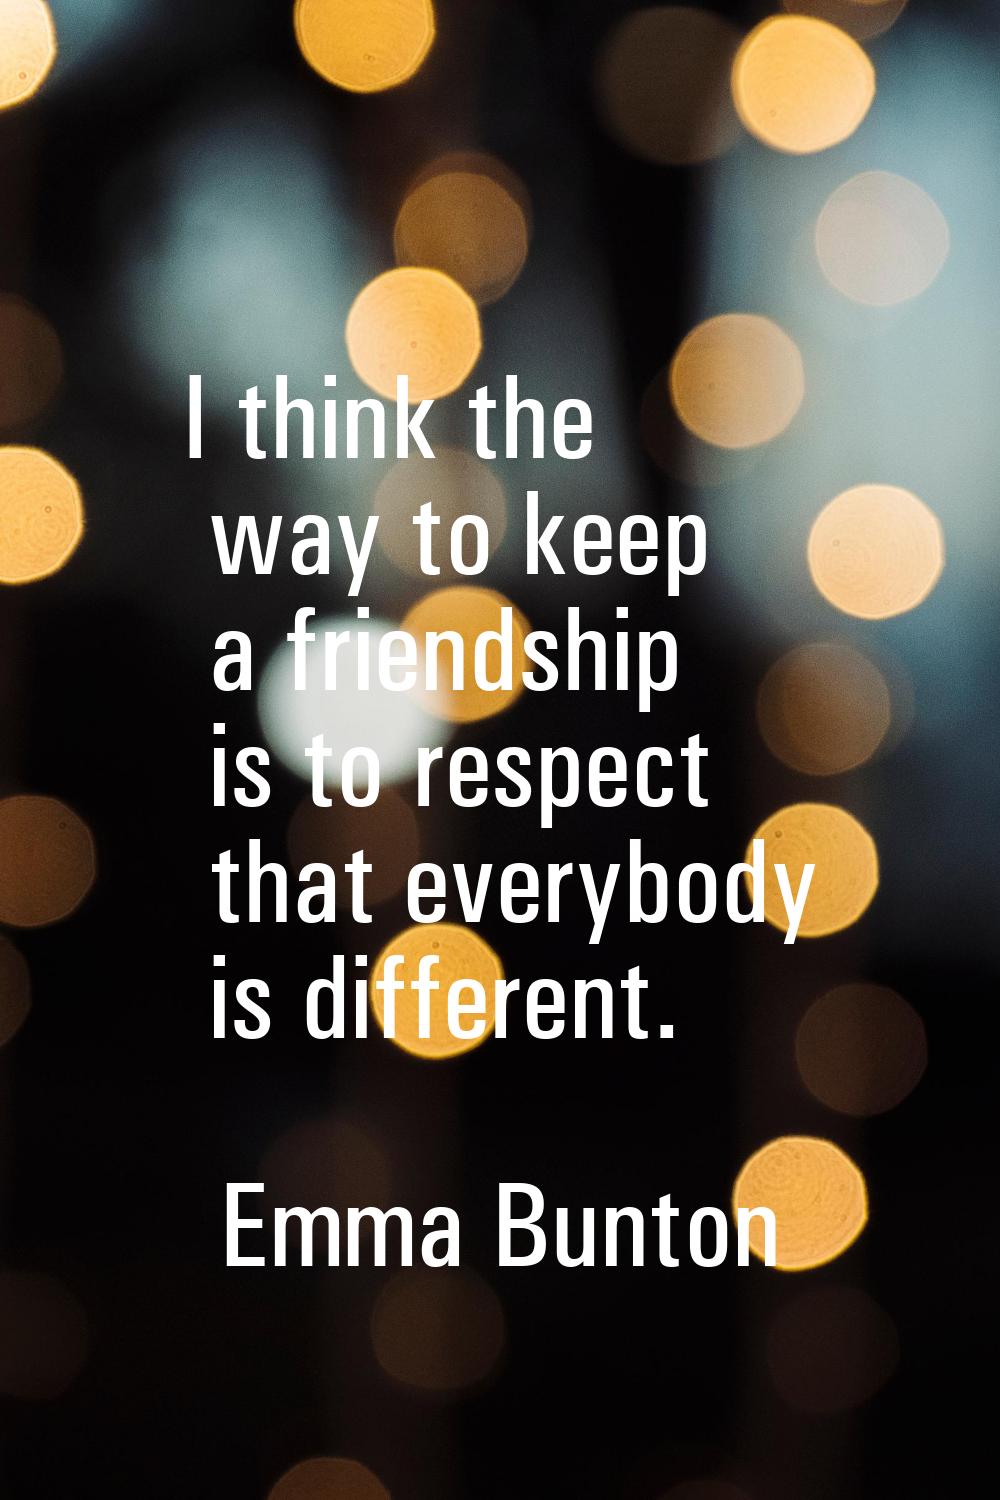 I think the way to keep a friendship is to respect that everybody is different.